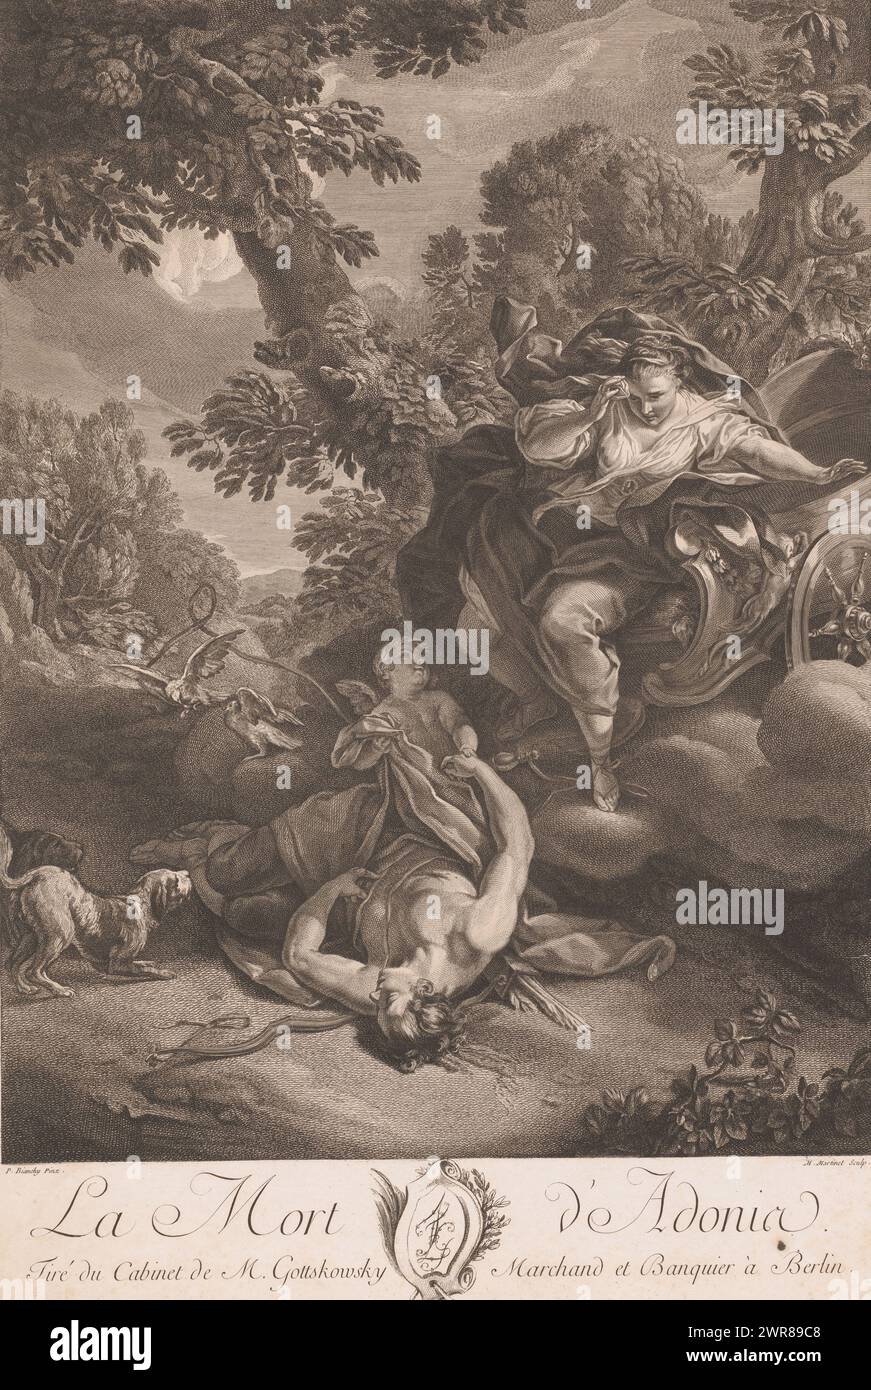 Death of Adonis, La Mort d'Adonis (title on object), print maker: M. Martinet, after painting by: Pietro Bianchi, publisher: J.B. Schiavonetti, print maker: France, publisher: Berlijn (deelstaat), 6-Jan-1809, paper, engraving, etching, height 615 mm × width 430 mm, print Stock Photo